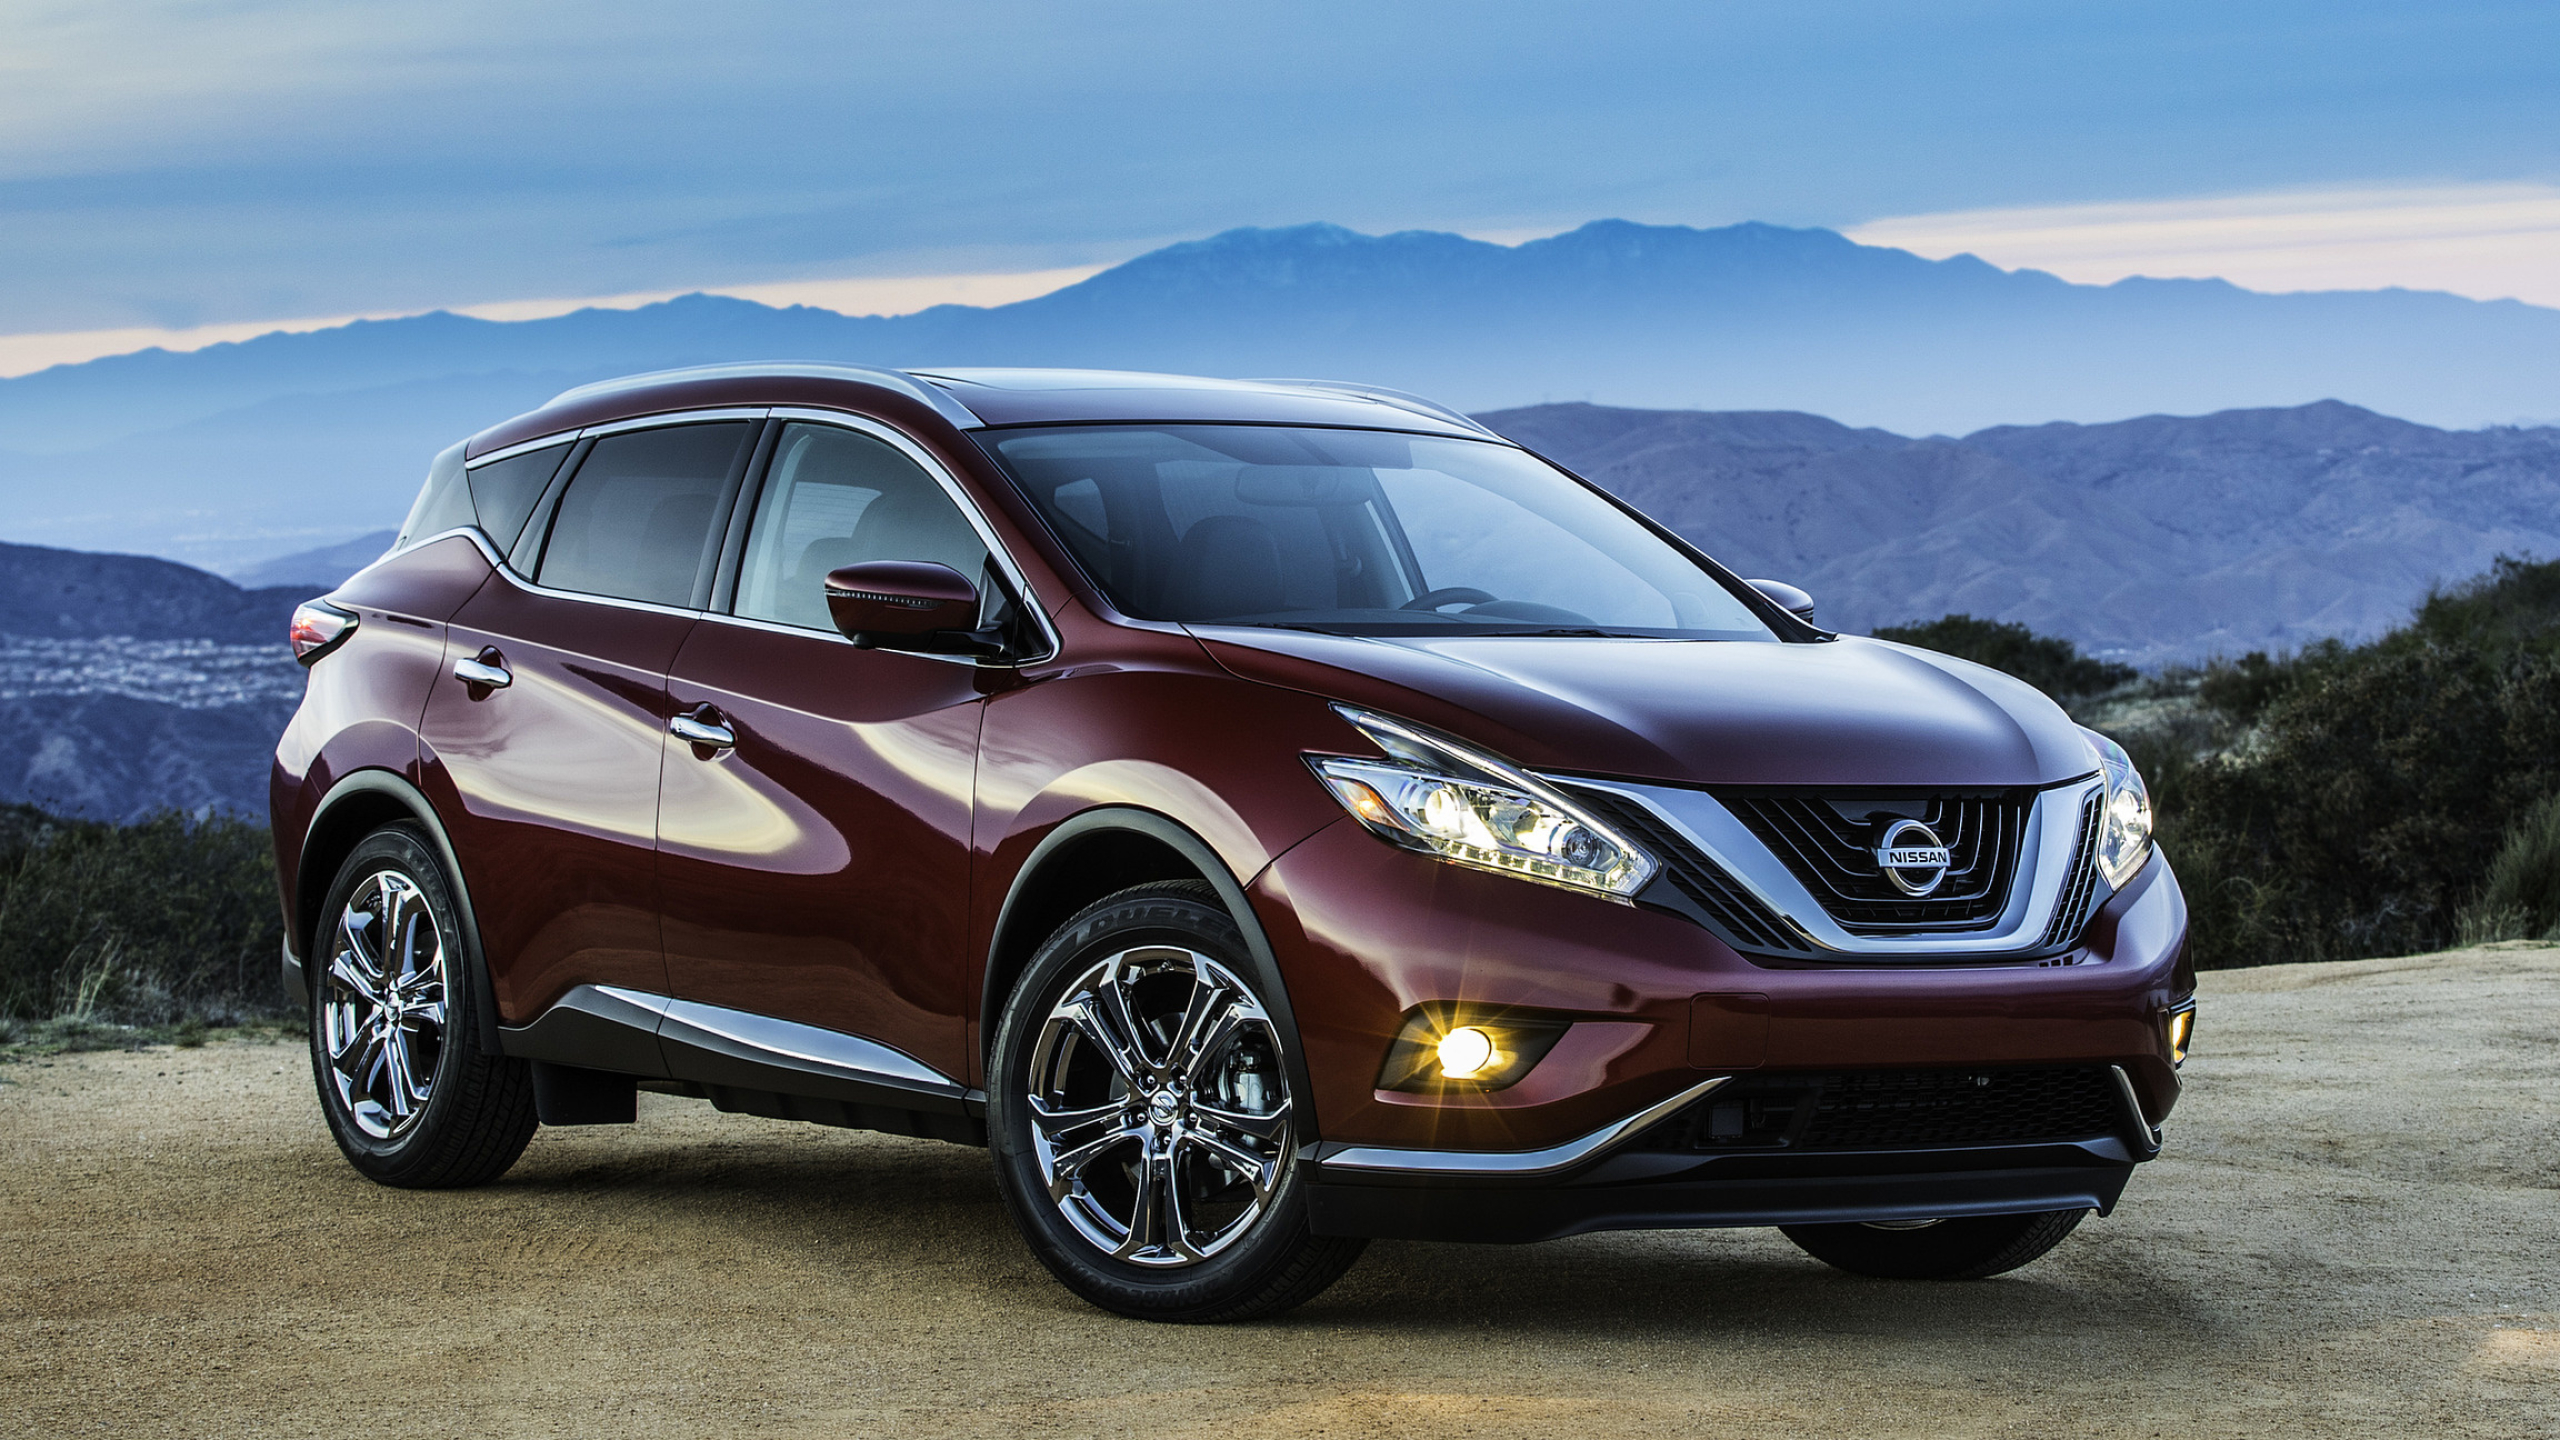 Nissan Murano, Murano wallpapers, High-quality images, 2560x1440 HD Desktop